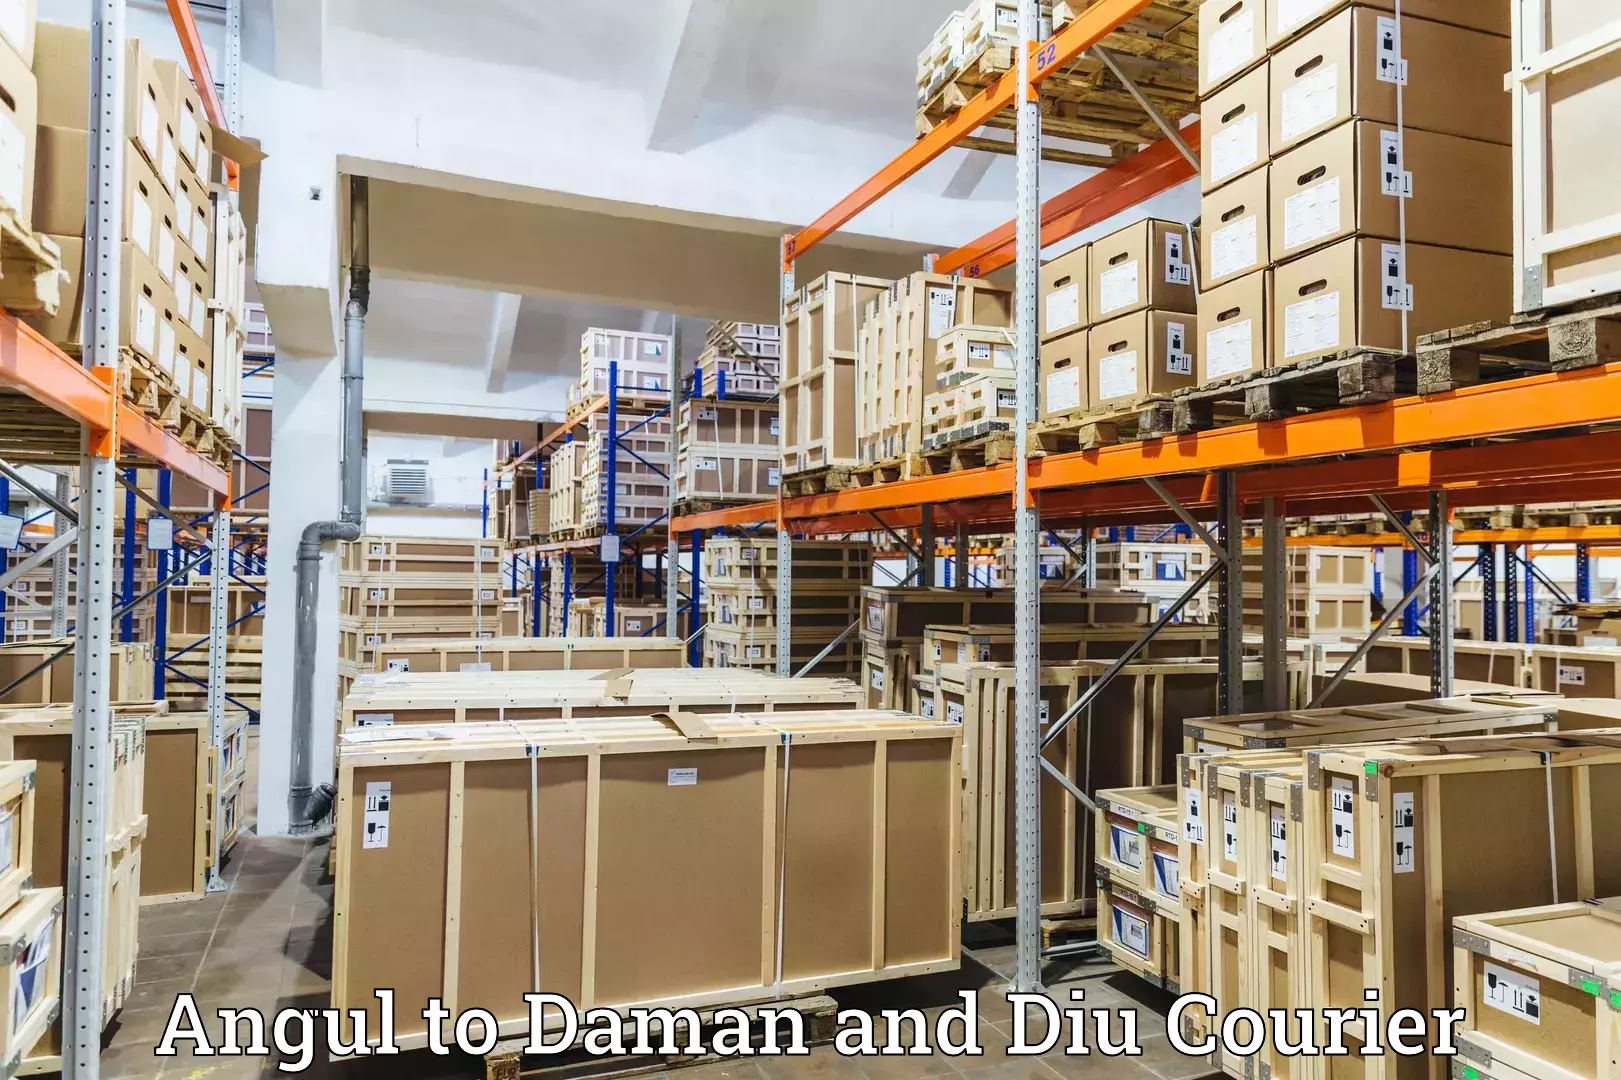 Parcel handling and care Angul to Daman and Diu